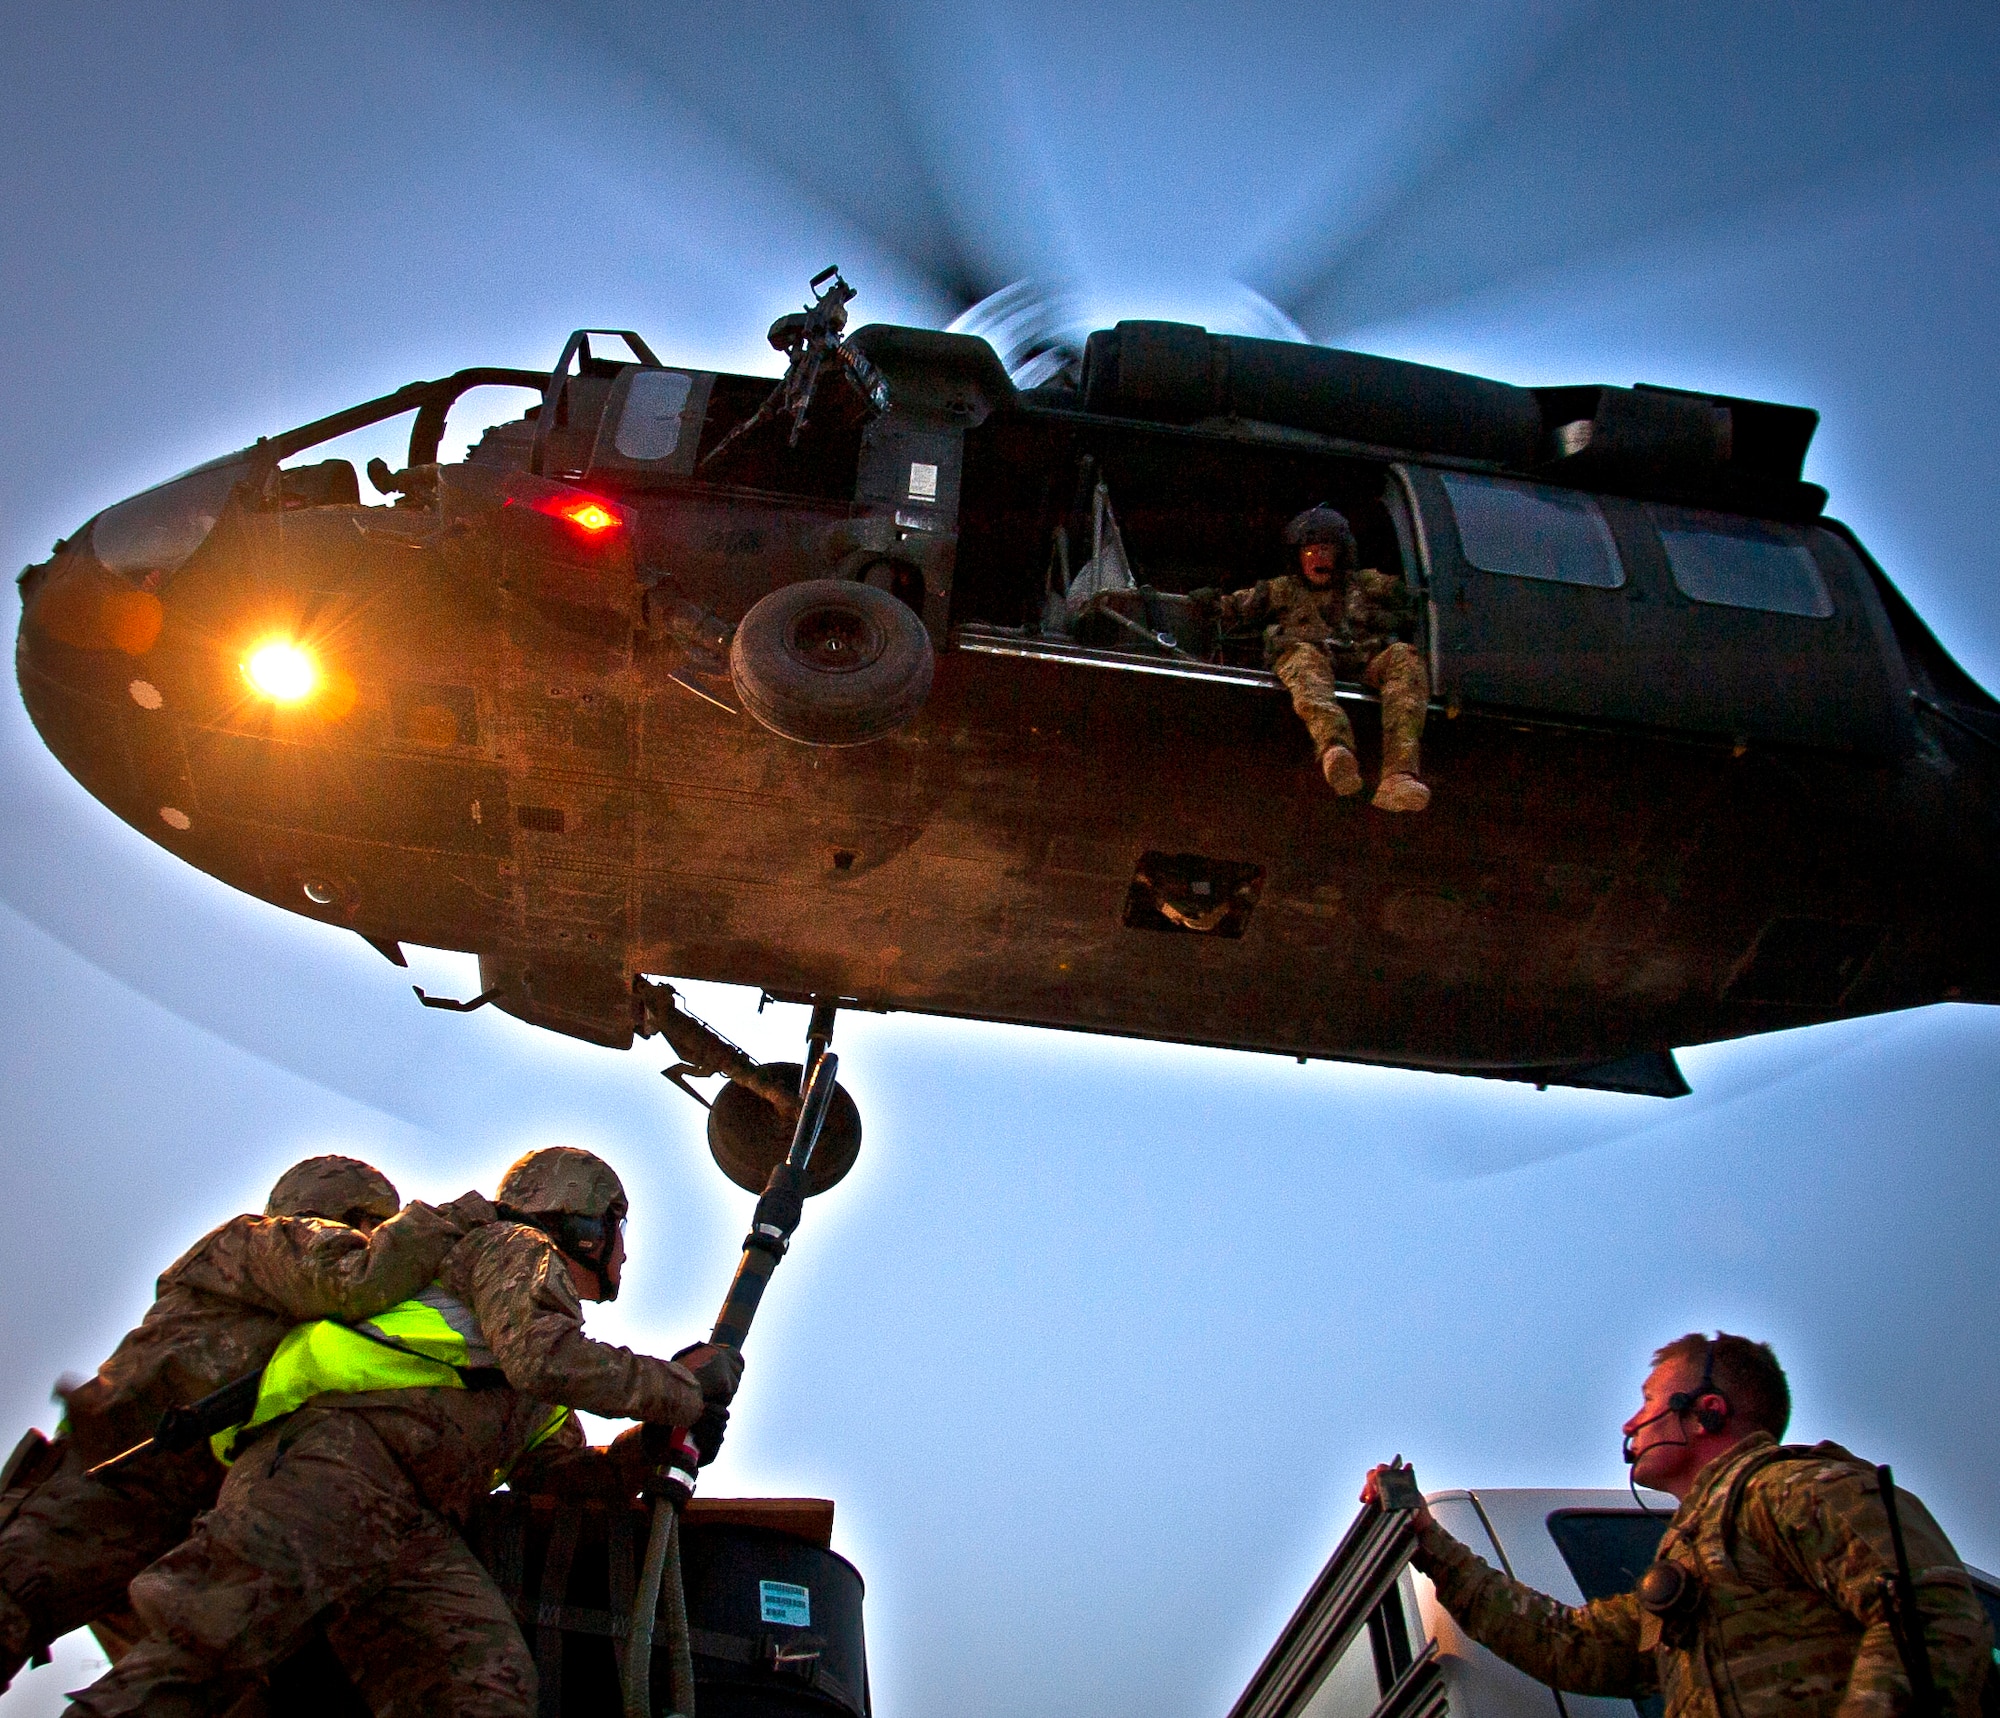 U.S. Air Force Capt. Christopher Kaighen braces Tech. Sgt. Michael Docodcil, both with the 451st Expeditionary Logistics Readiness Squadron, as they hook a 1,800 pound A-22 cargo bag to a UH-60 Black Hawk helicopter flown by Soldiers of the 3rd Combat Aviation Brigade during a joint-coalition sling load training mission at Kandahar Airfield, Afghanistan, June 1, 2013. U.S. Army Staff Sgt. Jacob Bishop (right), pathfinder with the 603rd Aviation Support Battalion, supervises the loading while U.S. Army Spc. Tyler Burriss, Task Force Knighthawk crew chief, 2-3 General Support Aviation Battalion, monitors from above. (U.S. Air Force photo/Senior Airman Scott Saldukas)